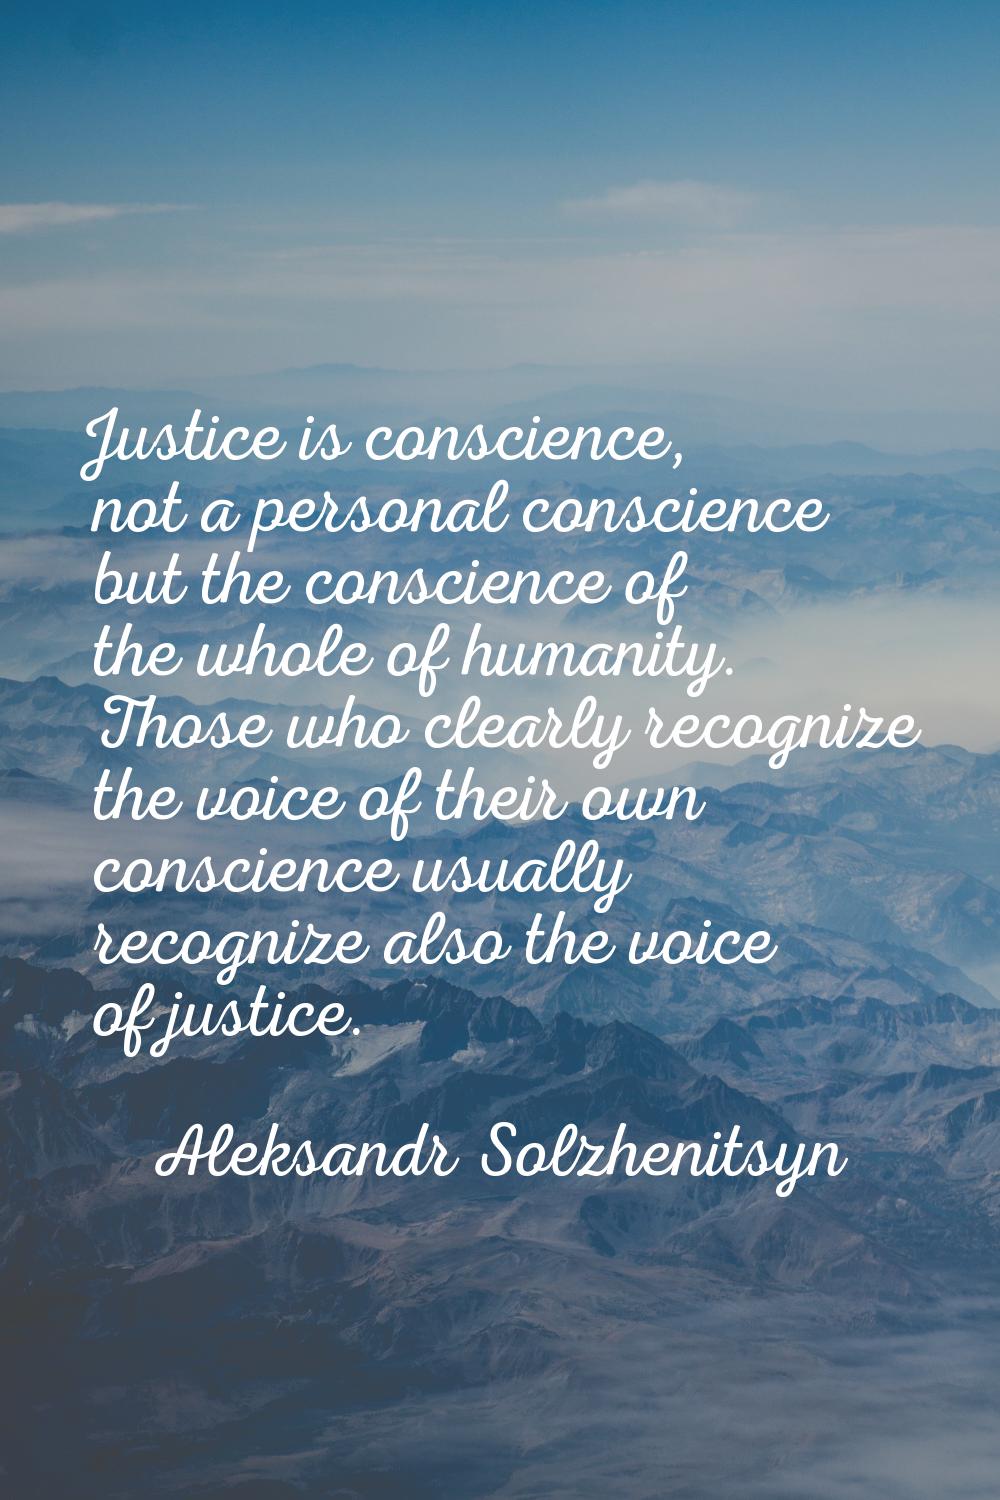 Justice is conscience, not a personal conscience but the conscience of the whole of humanity. Those